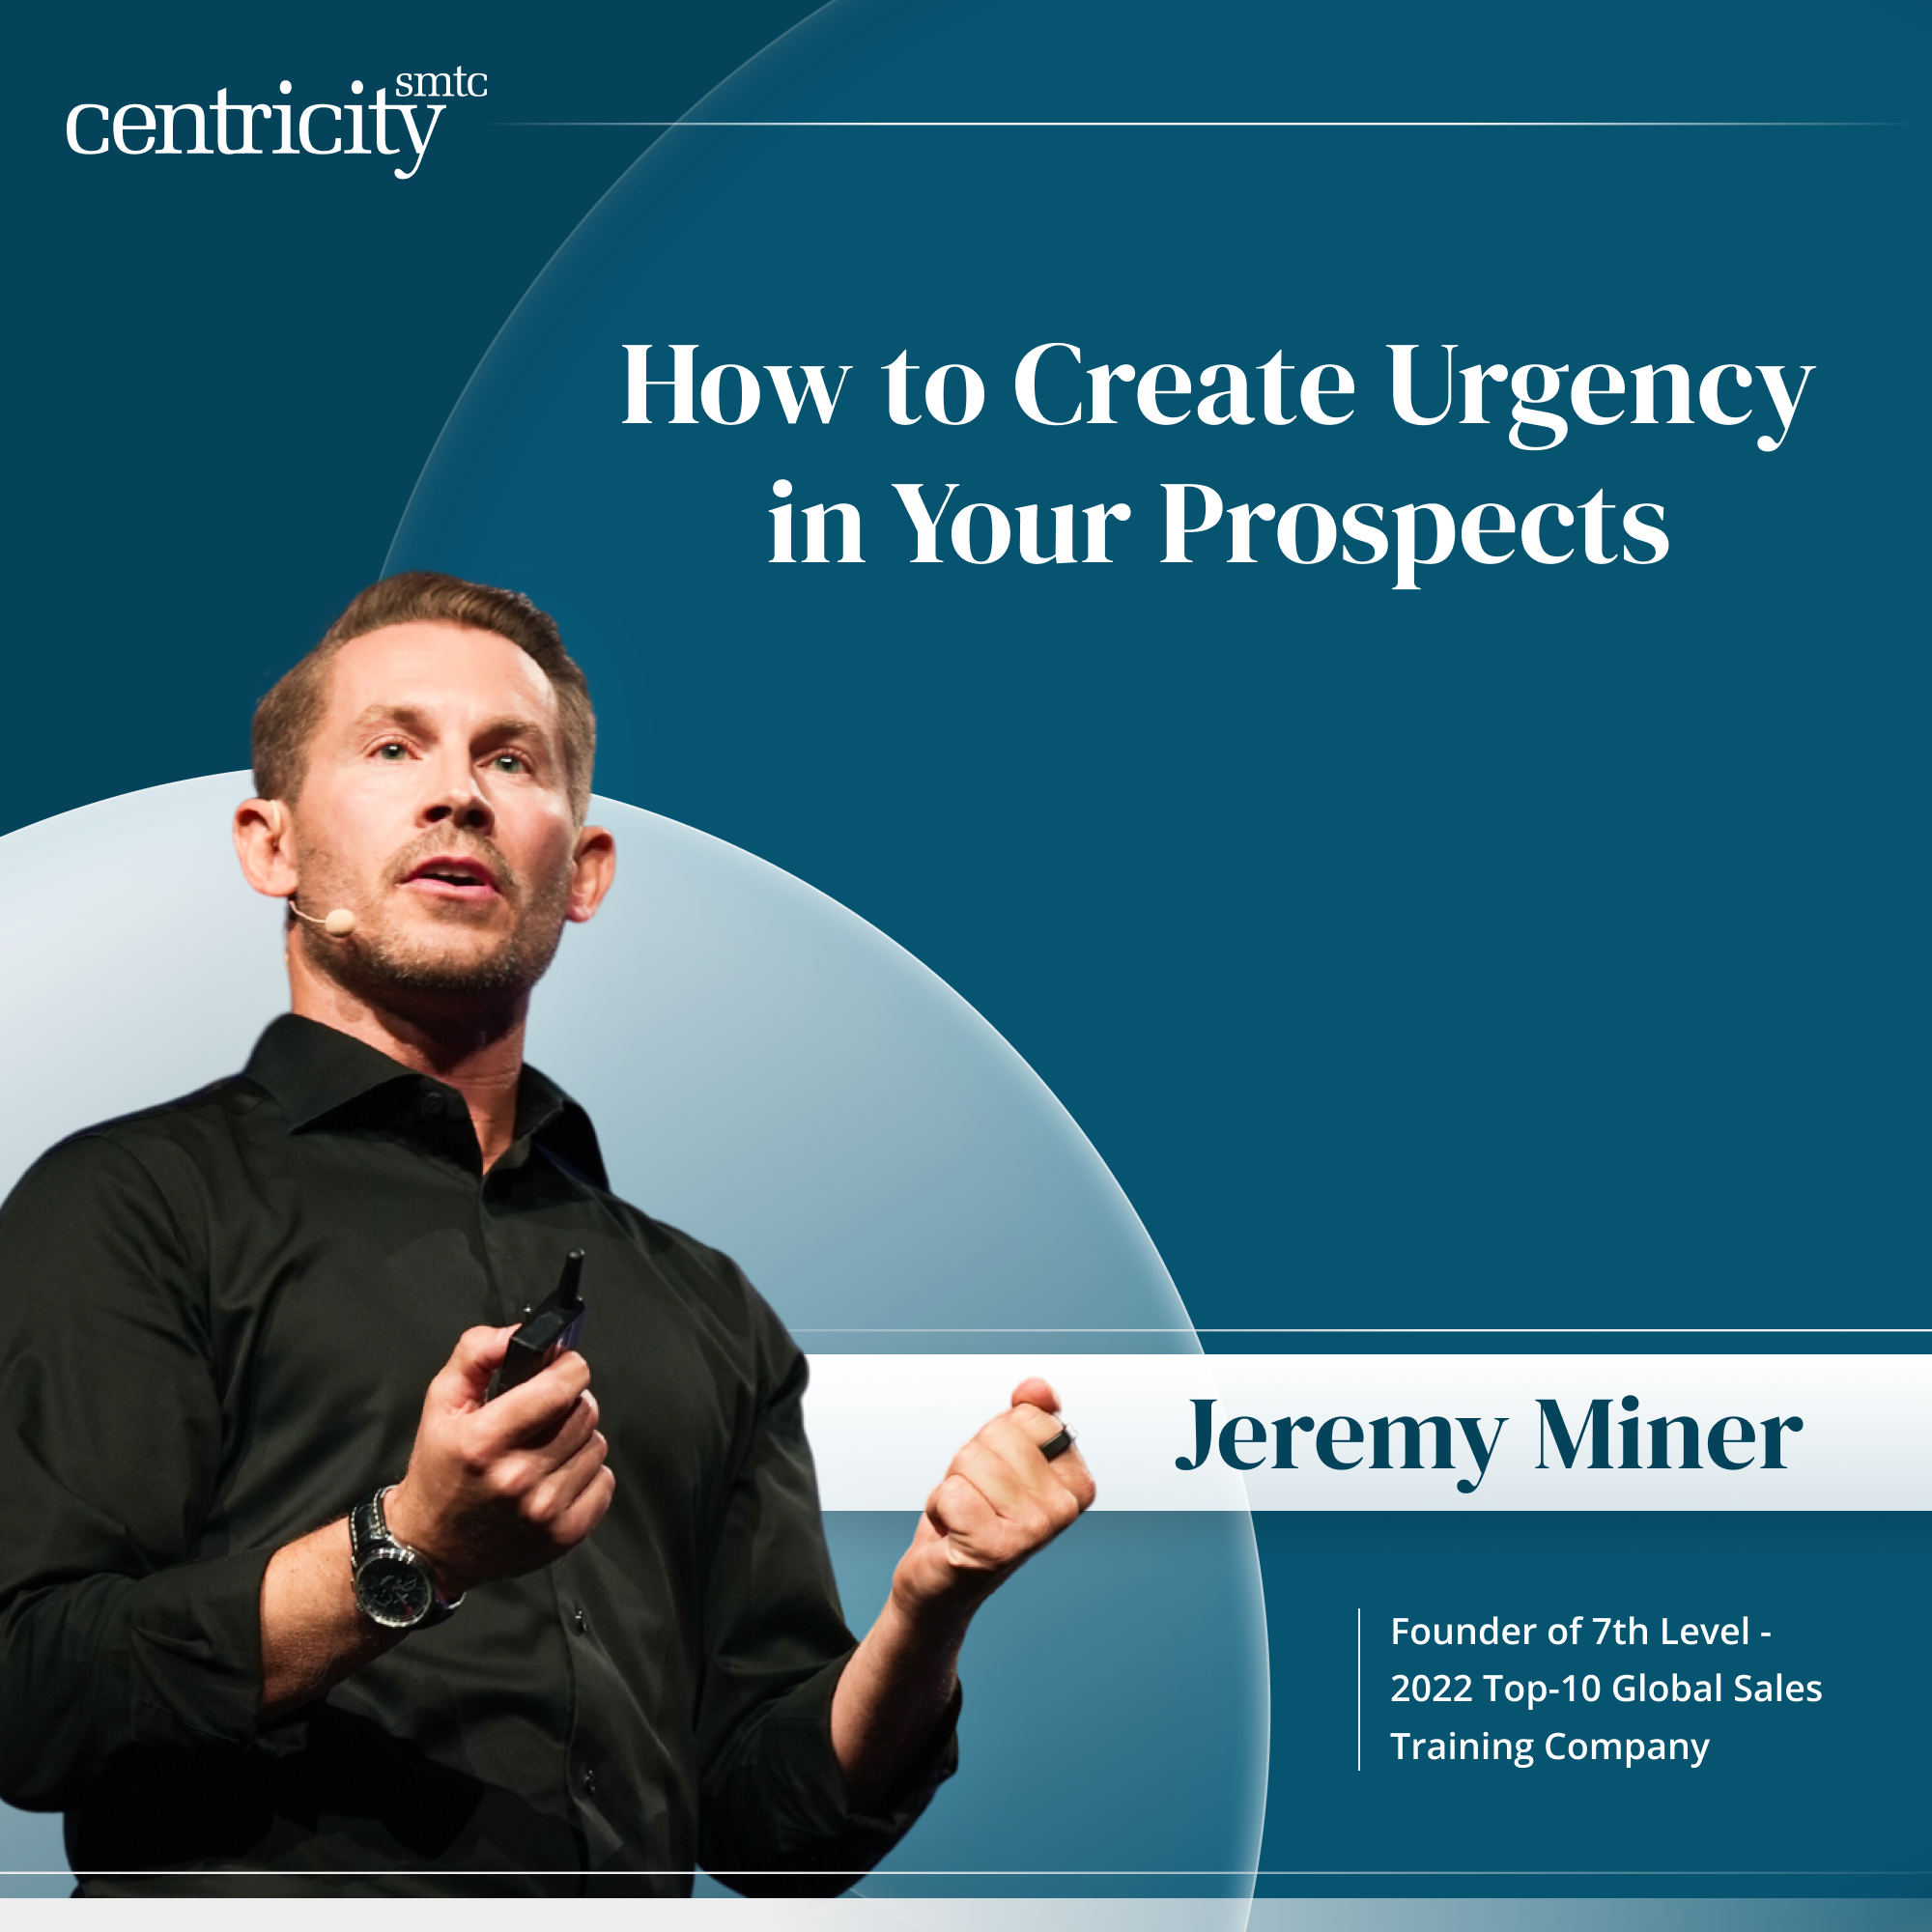 How to Create Urgency in Your Prospects